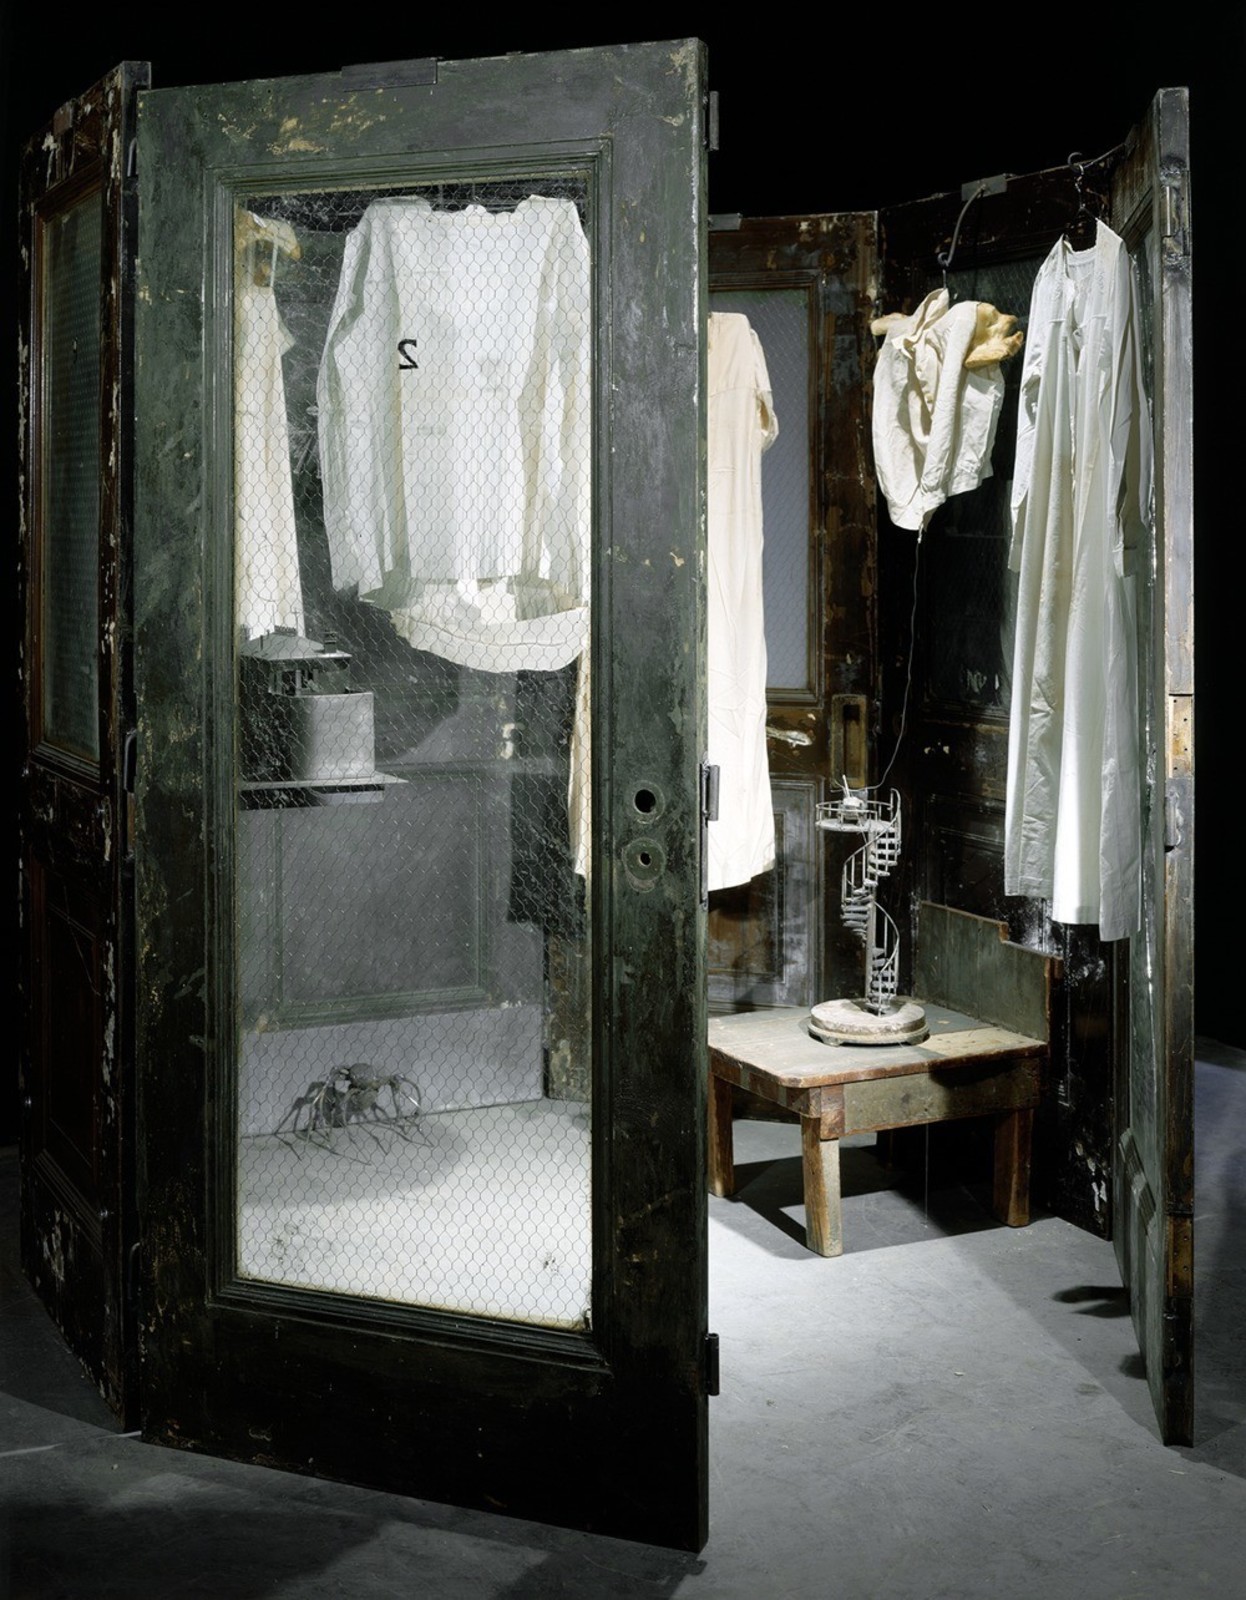 Louise Bourgeois Cell VII, 1998 Metal, glass, fabric, bronze, steel, wood, bones, wax and thread 207 x 221 x 210.8 cm. Private Collection, Courtesy Hauser &amp; Wirth Photo: Christopher Burke, &copy; The Easton Foundation / RAO, Moscow